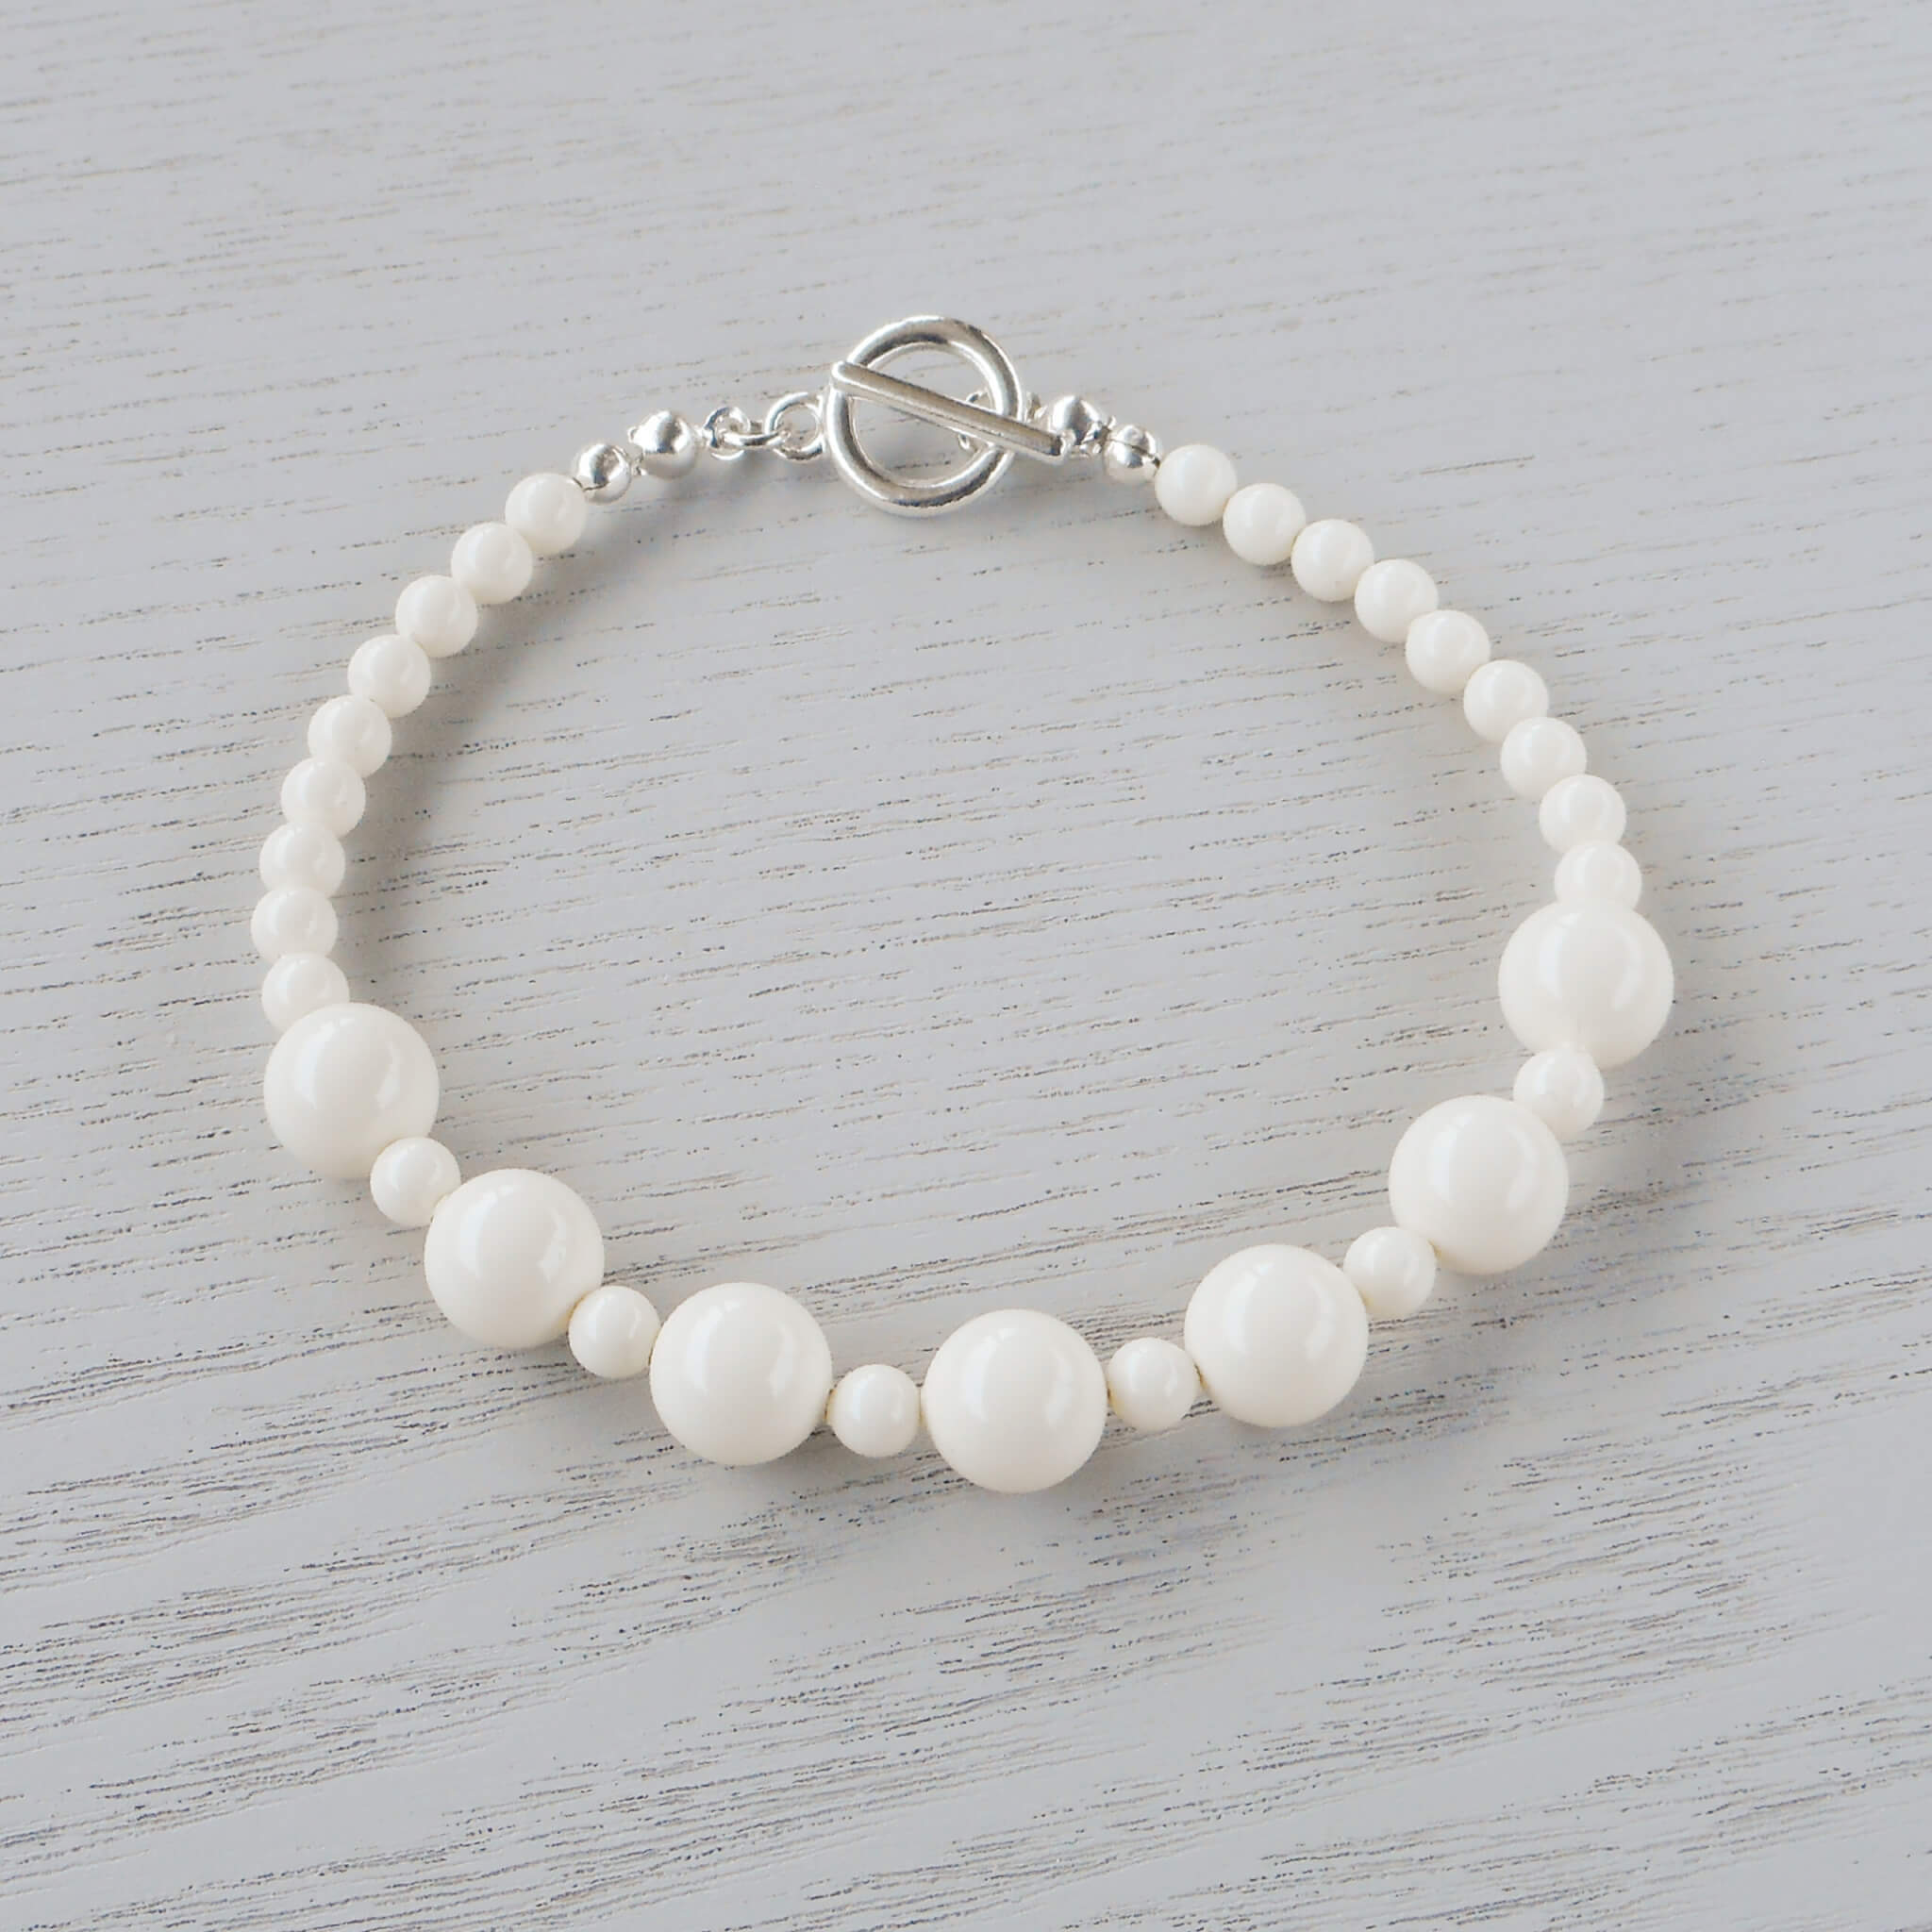 Ava Ivory Glass Crystal Bracelet The rich cream of 4mm & 8mm Ivory Swarovski glass pearls bring an Old World charm to this bracelet. 